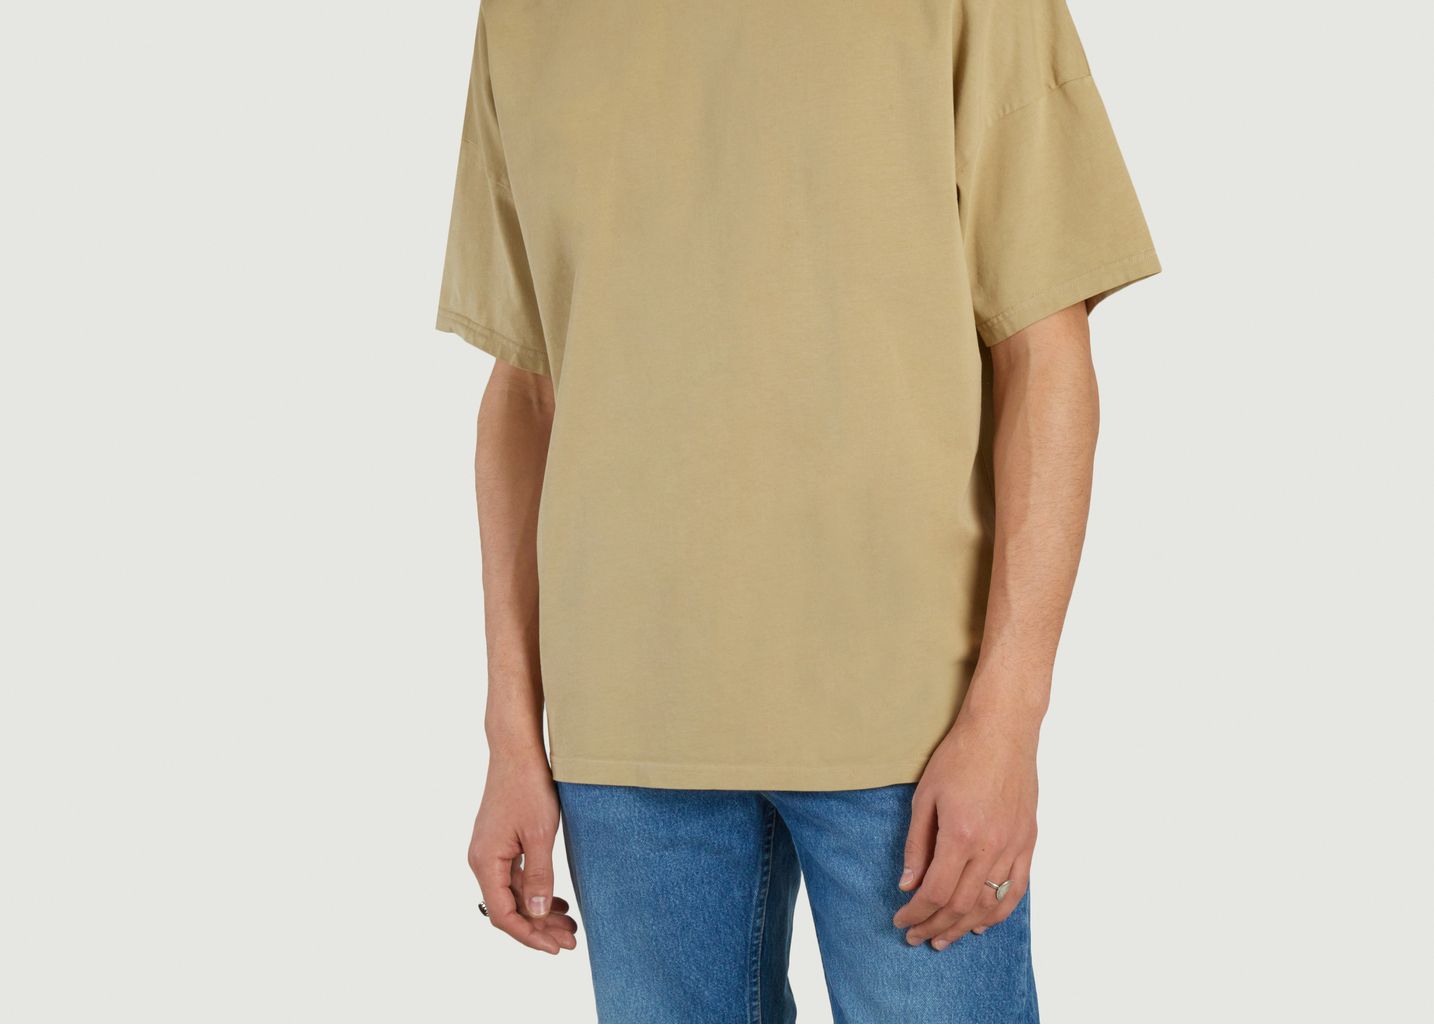 Fizvalley loose-fitting cotton T-shirt - American Vintage